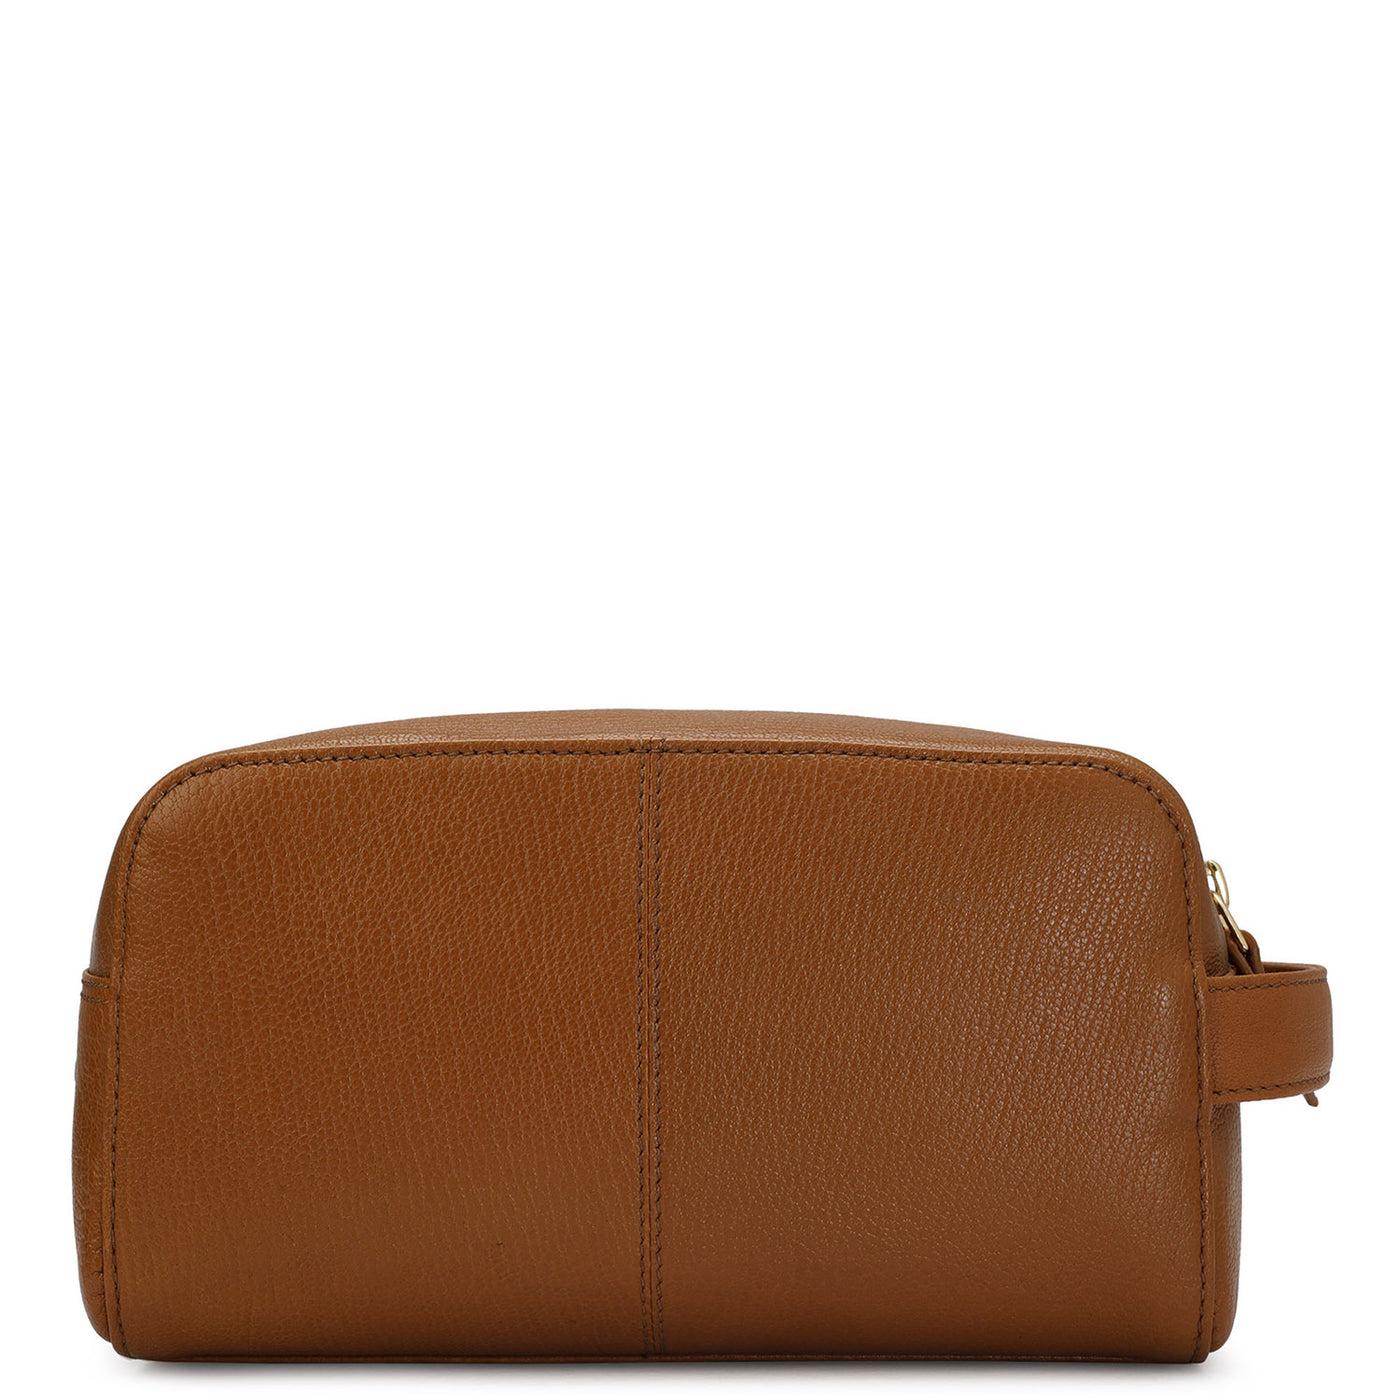 Wax Leather Multi Pouch - Tan